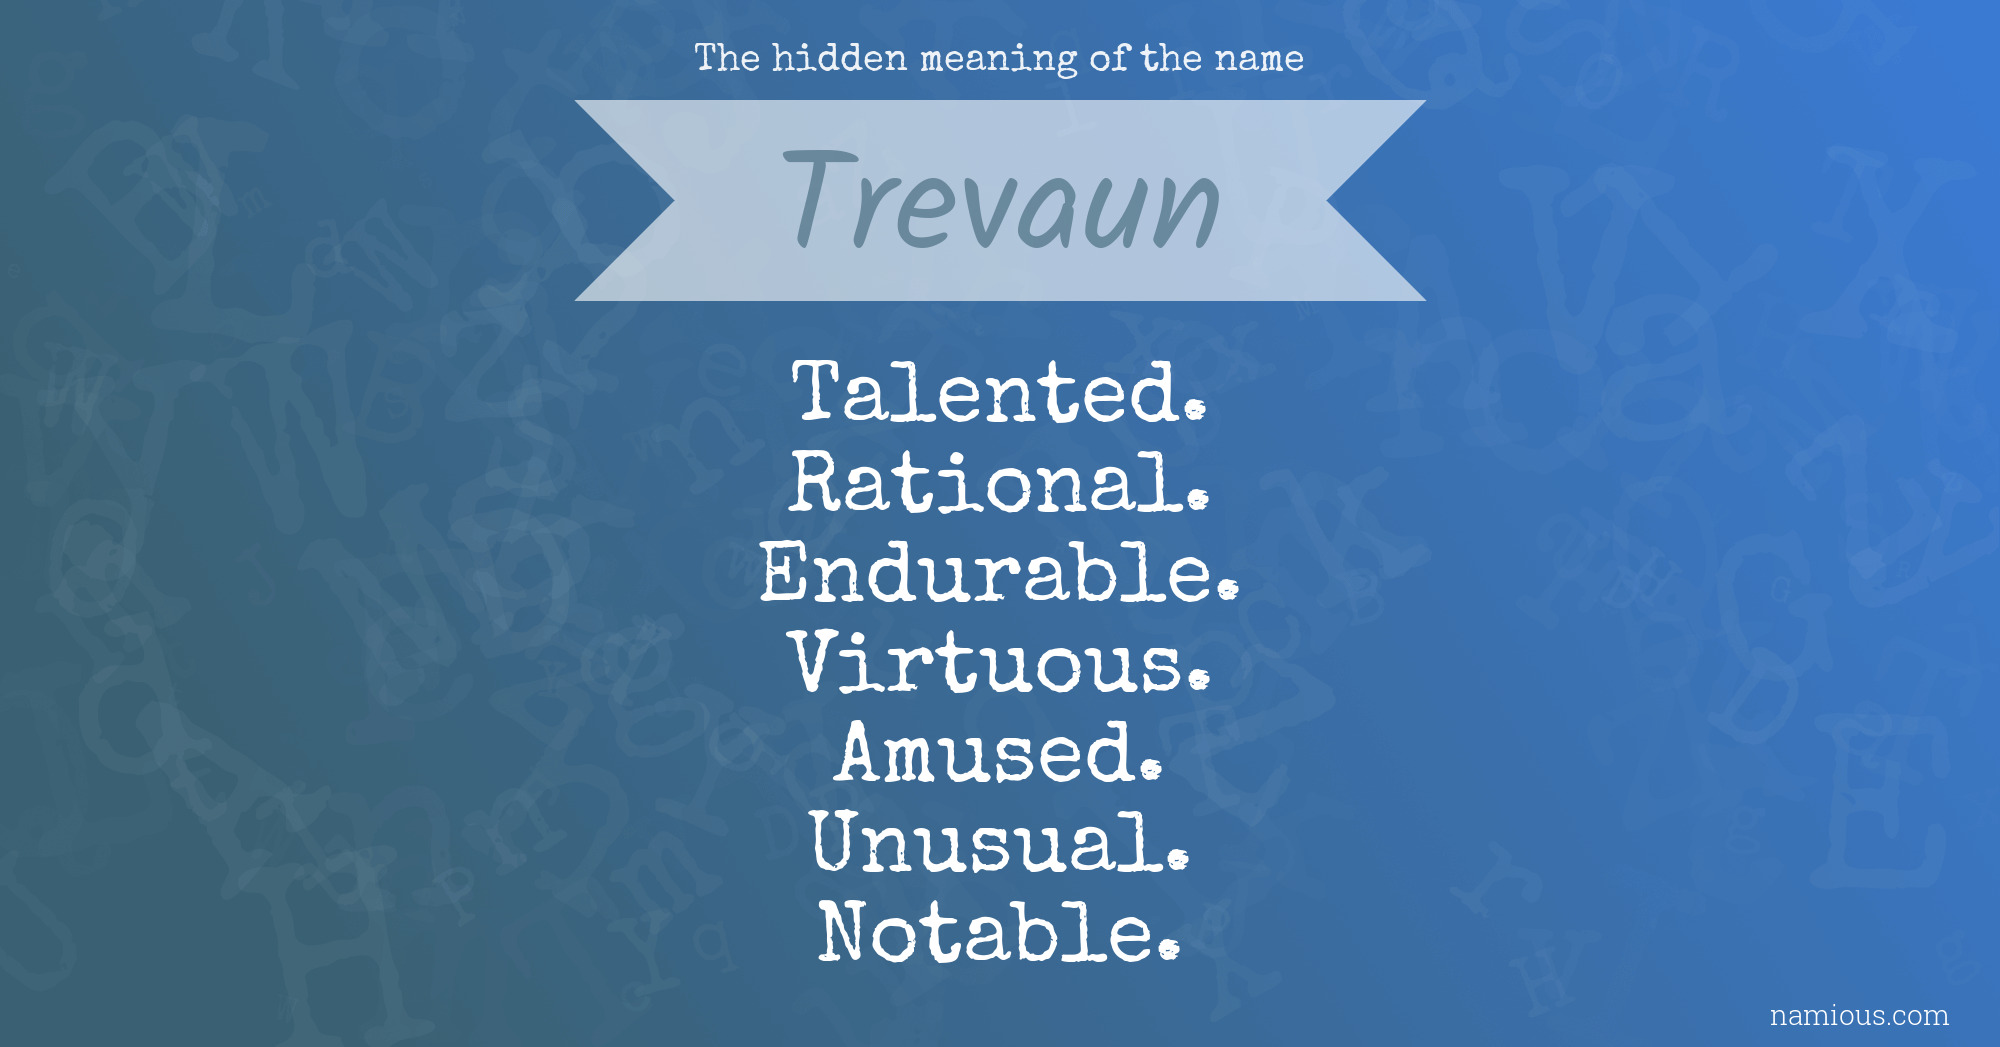 The hidden meaning of the name Trevaun